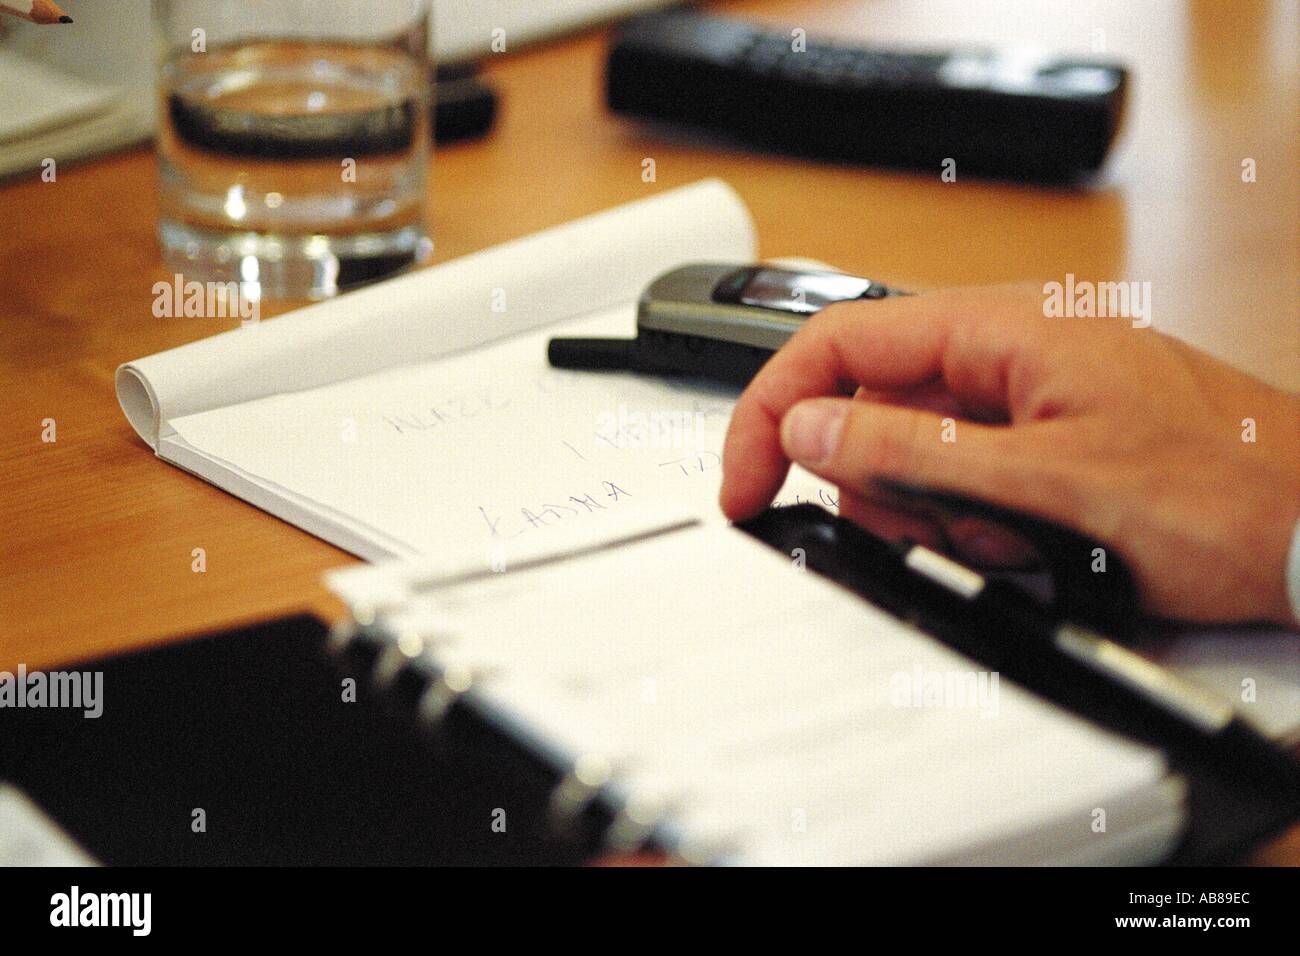 Personal organiser on a desk Stock Photo